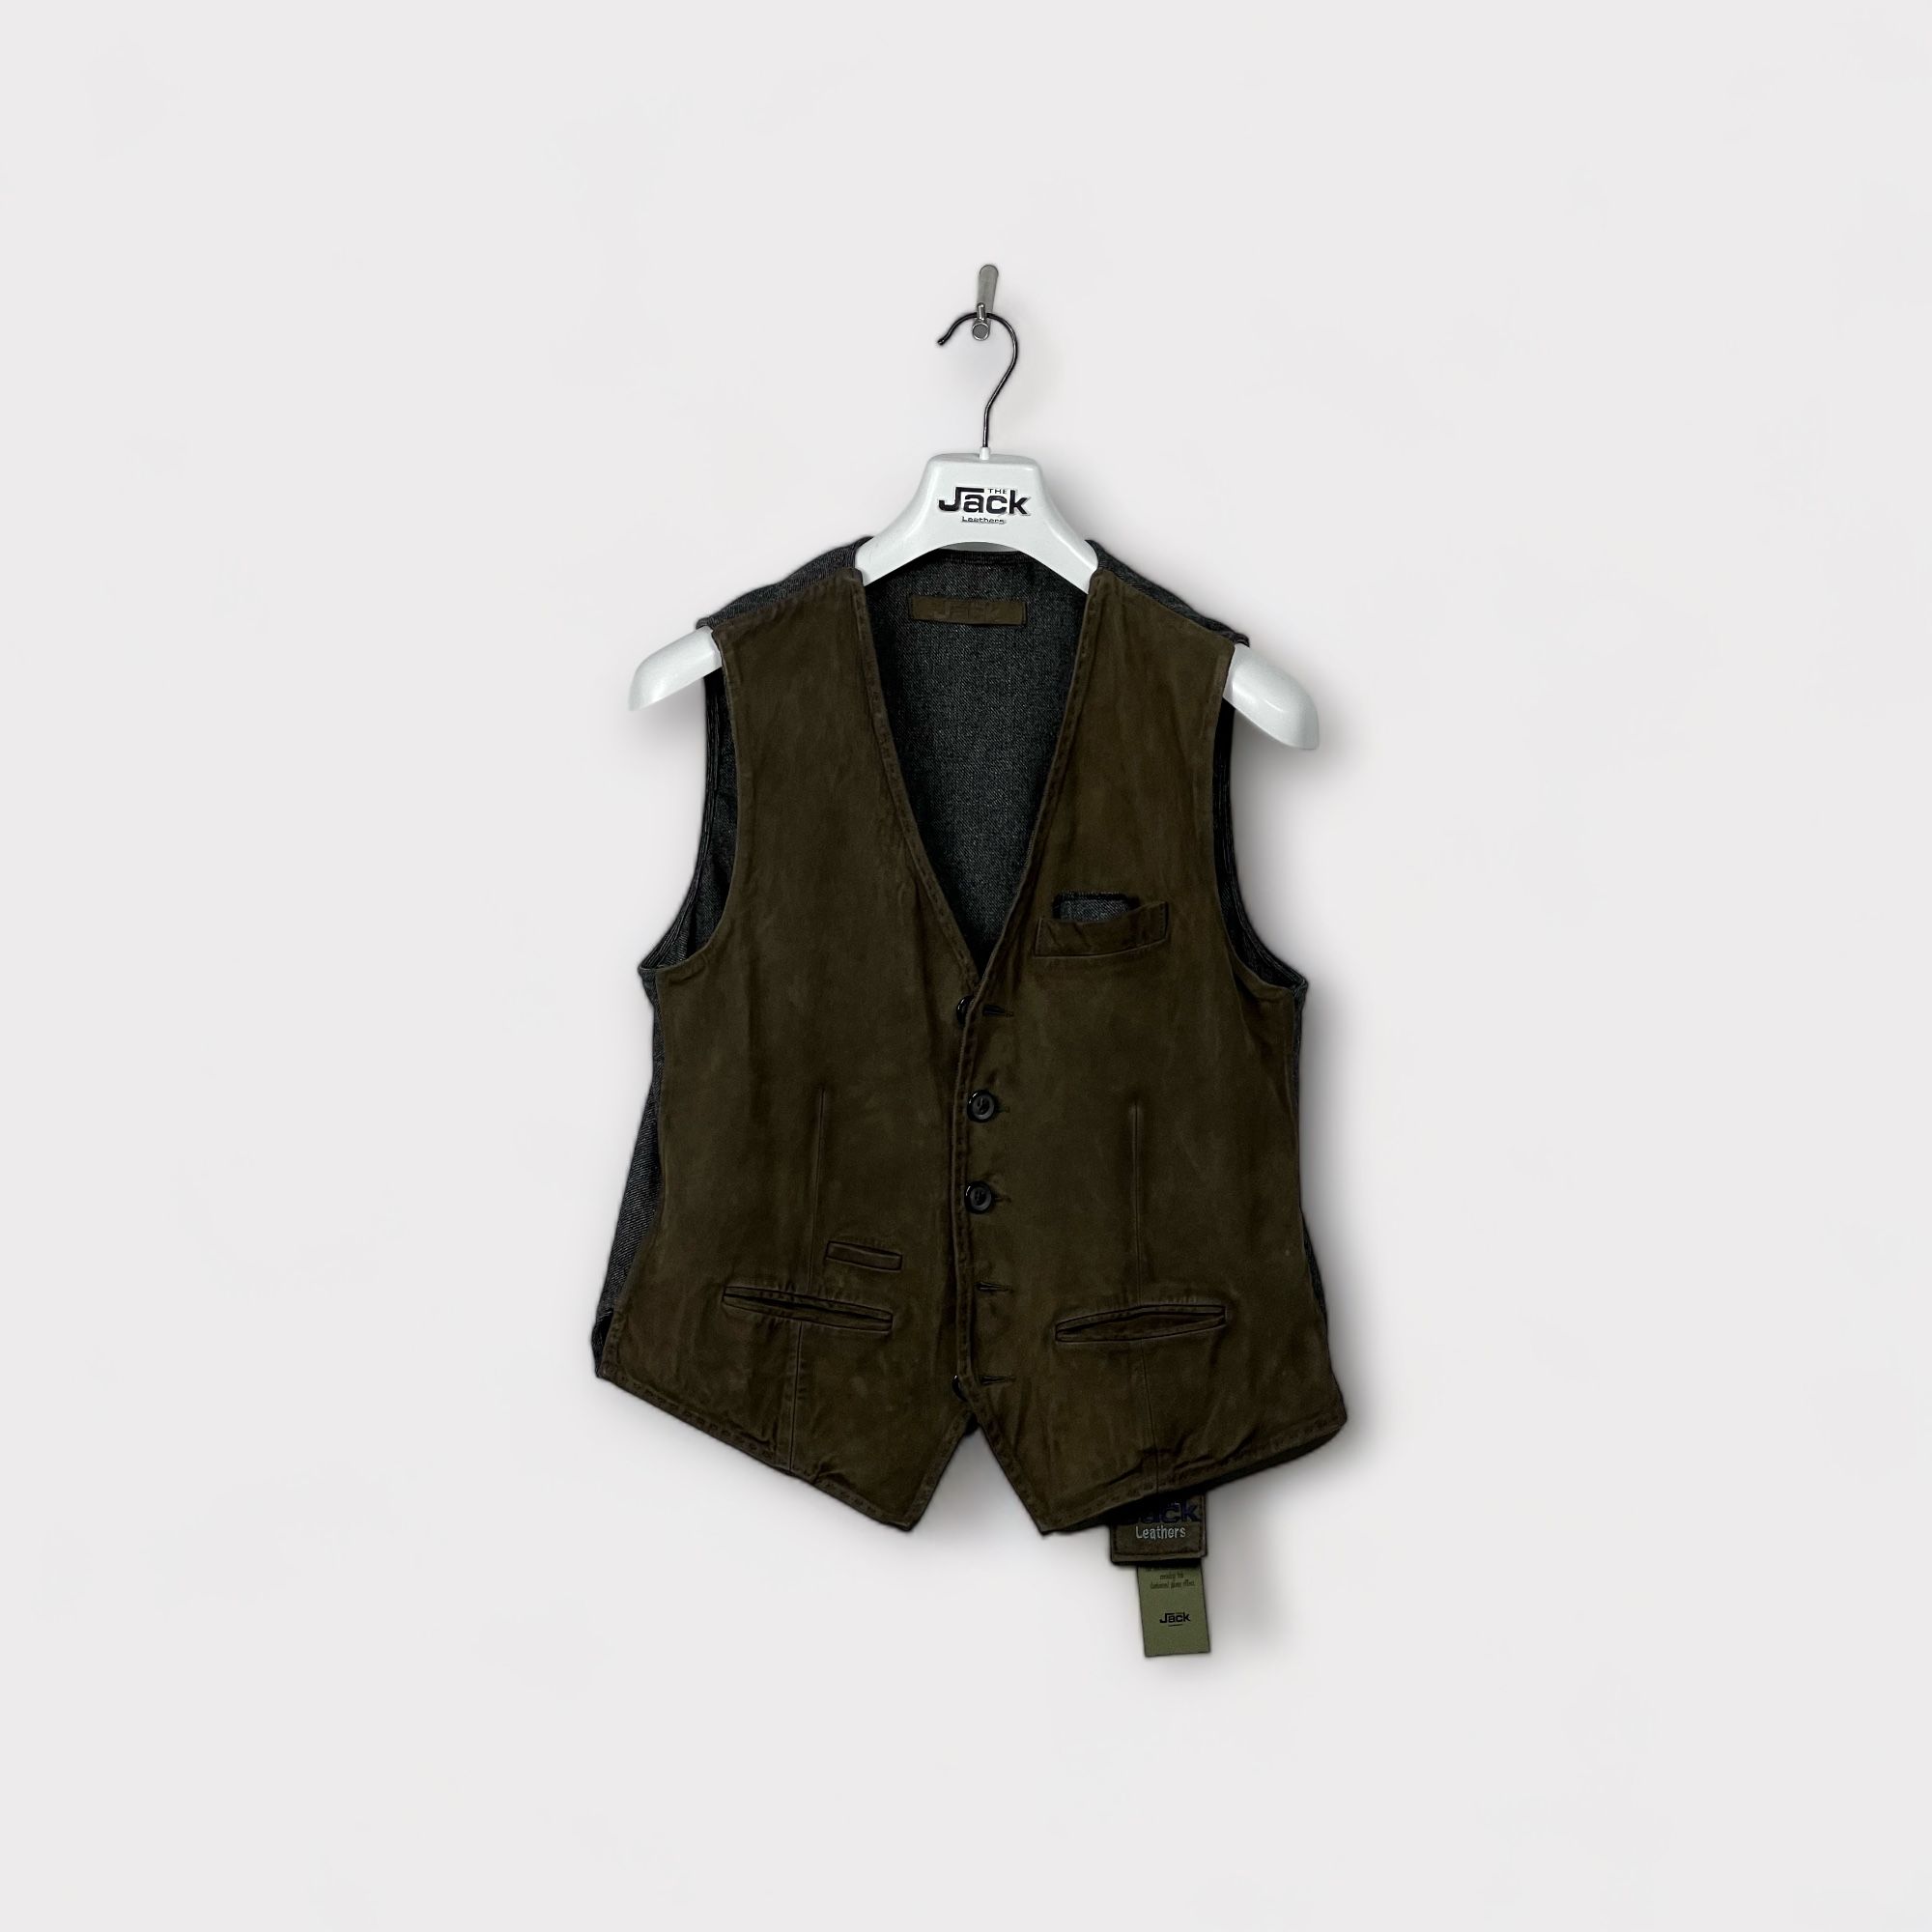 The Jack and Jackie Leathers - Gilet scamosciato "Lorry" in burned suede